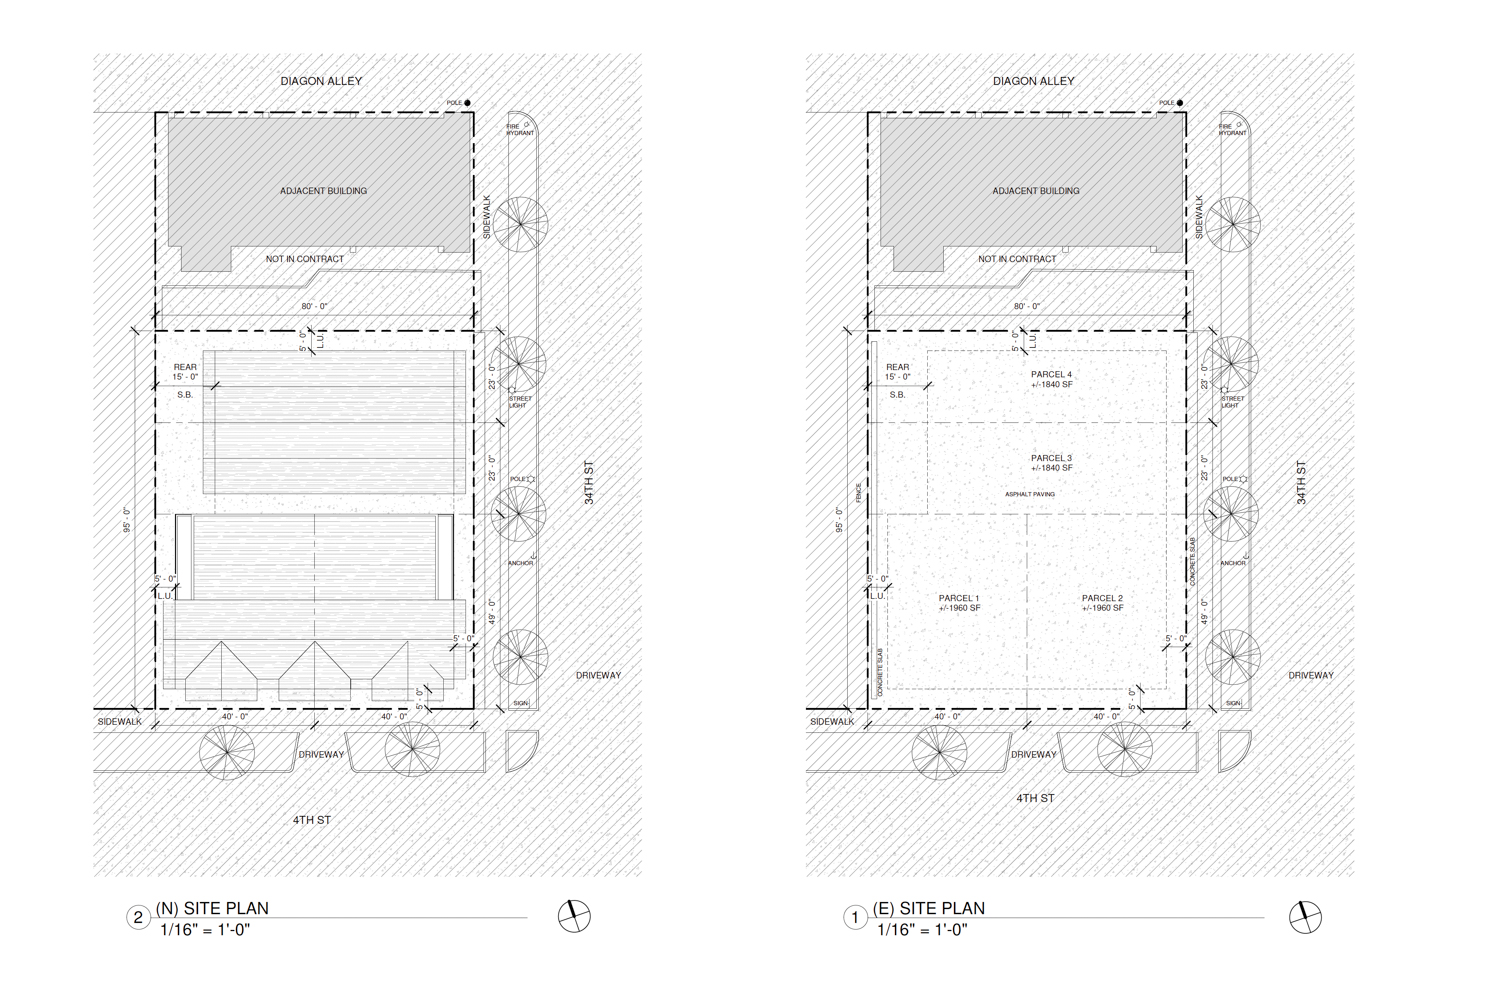 2832 34th Street site maps of new (right) and (existing) condition, illustration by Creates Cool